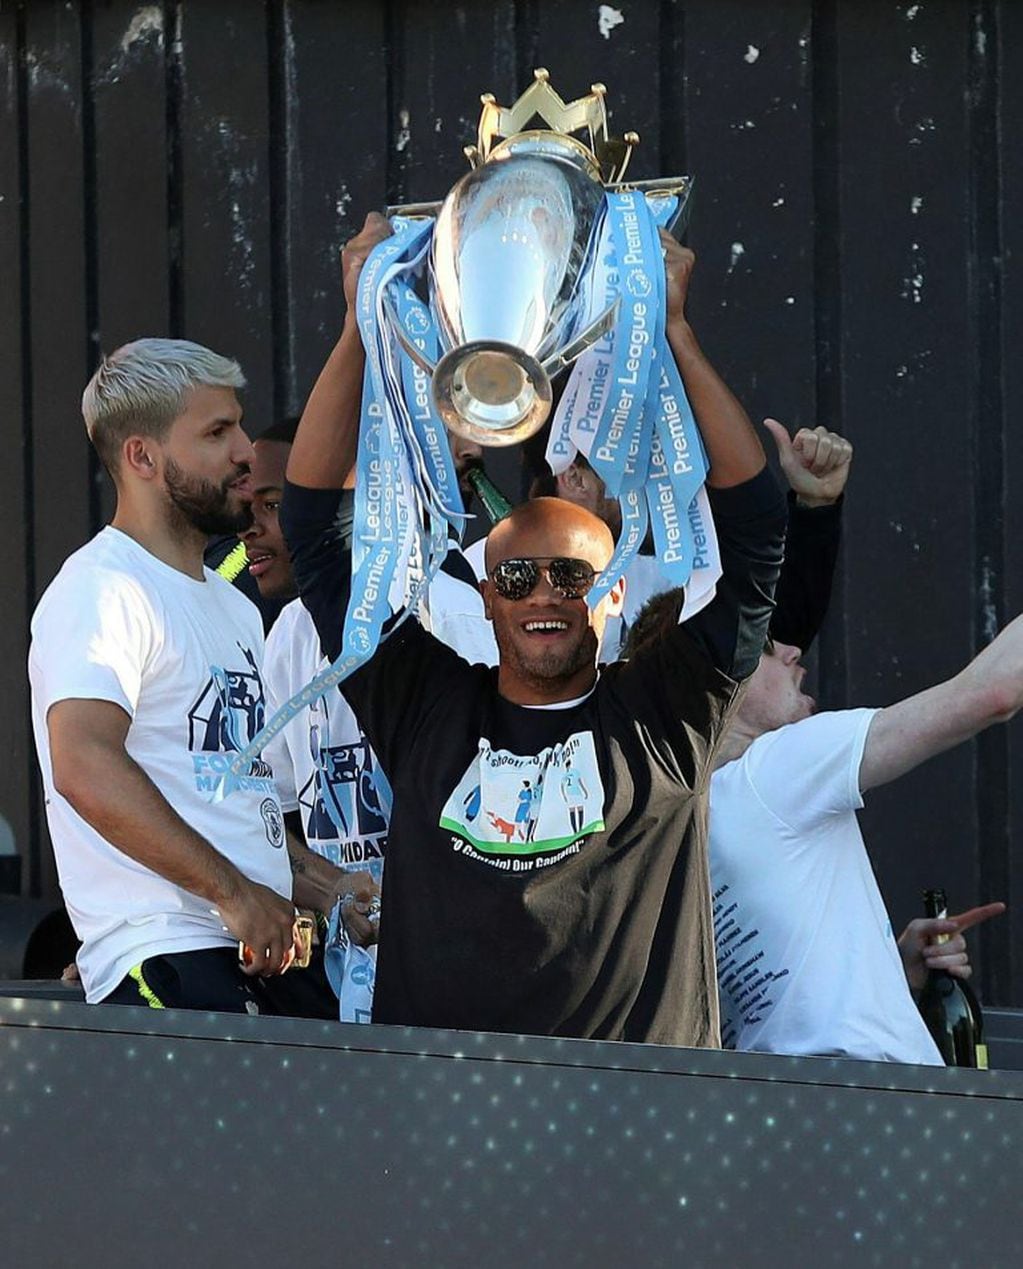 Manchester City's Vincent Kompany lifts the Premier League trophy during the trophy parade in Manchester, England, Monday May 20, 2019, after winning the English FA Cup. Victory for Pep Guardiola’s side came a week after the English Premier League trophy was retained to join the League Cup and Community Shield already in City’s possession. (Nick Potts/PA via AP)